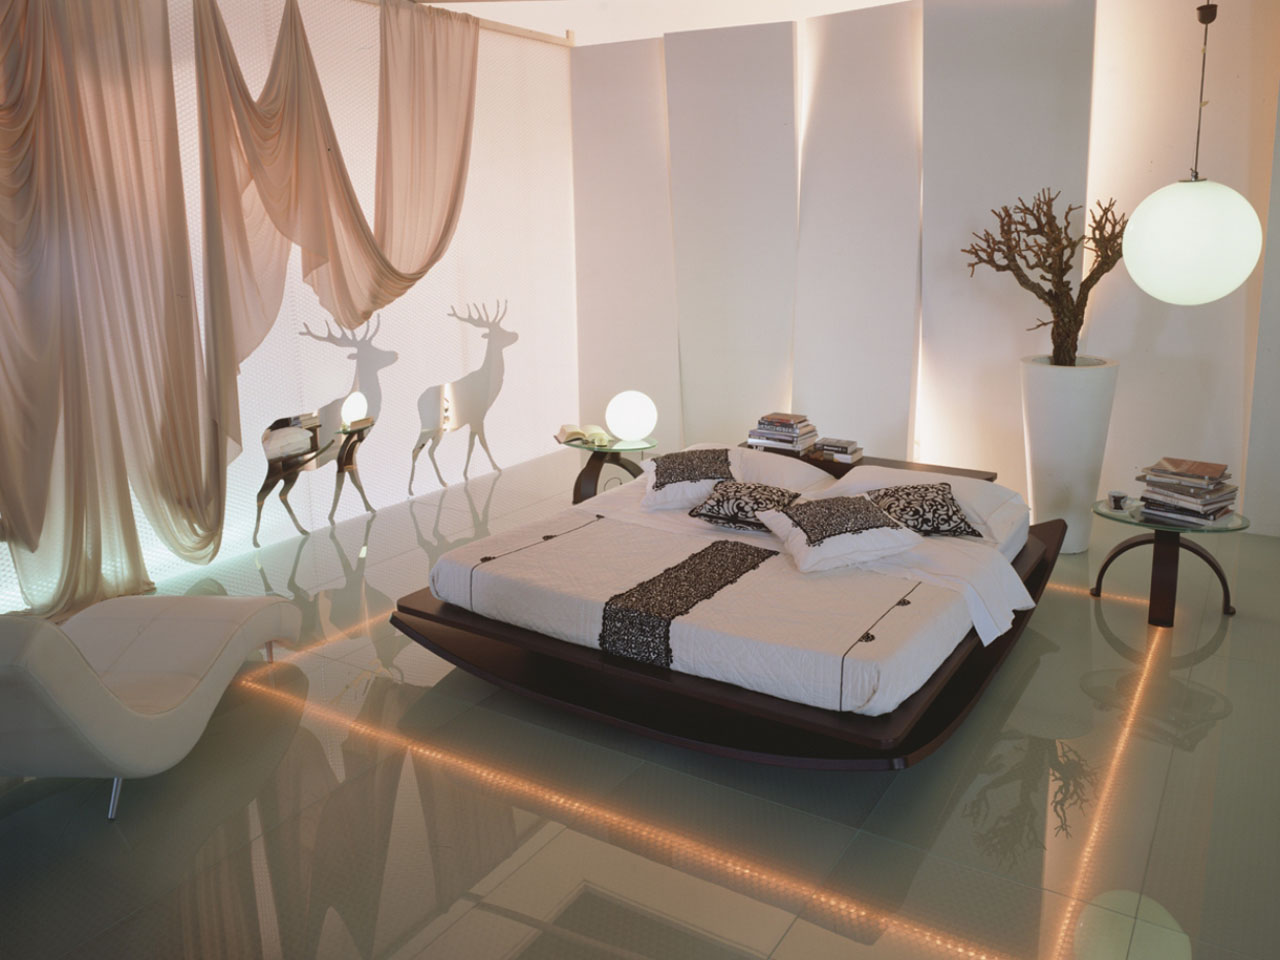 Design Your Adults Sweet Design Your Own Young Adults Bedroom Ideas With Beautiful LED Lighting And Wooden Indoor Furniture Also White Cushions And Soft Pillow Grey Gloss Ceramic Flooring Cream Wall Bedroom  27 Enchanting And Awesome Bedroom Ideas For Young Adults